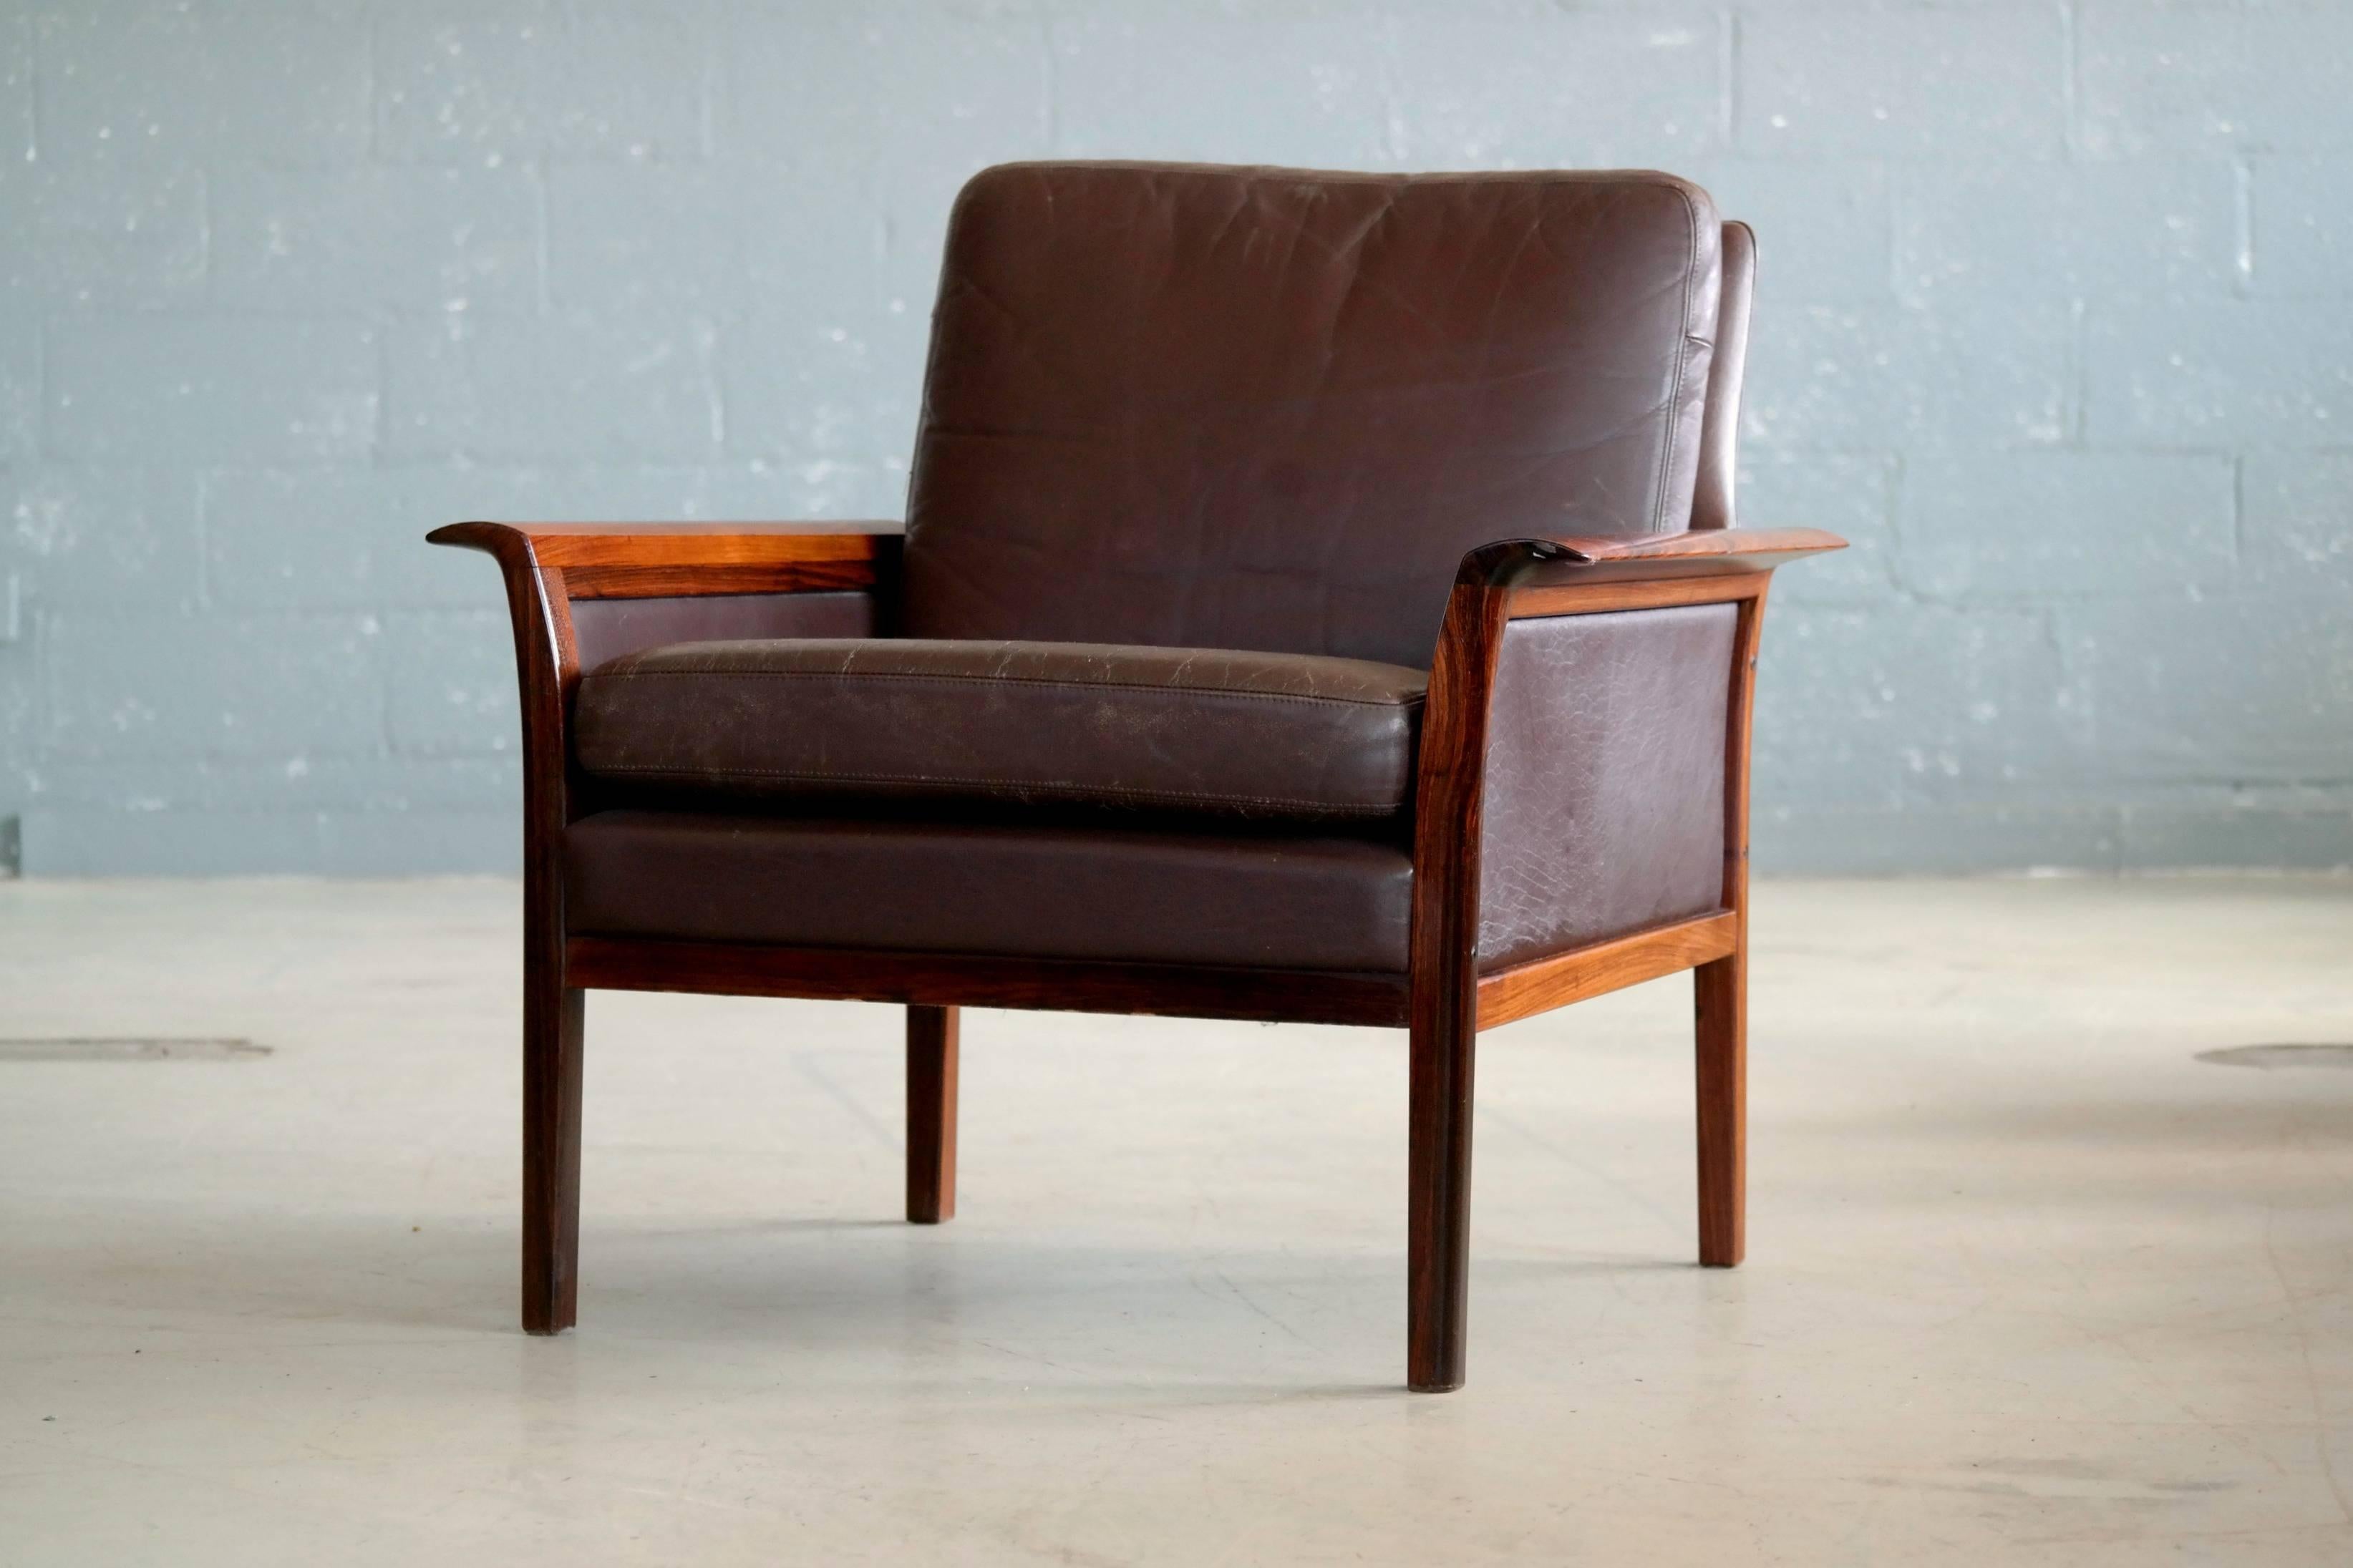 Beautiful Hans Olsen designed lounge chair in supple cordovan leather and rosewood frame manufactured by Vatne of Norway in the late 1960s. Olsen's characteristic design with finely polished rolled wing shaped armrests in solid rosewood. The